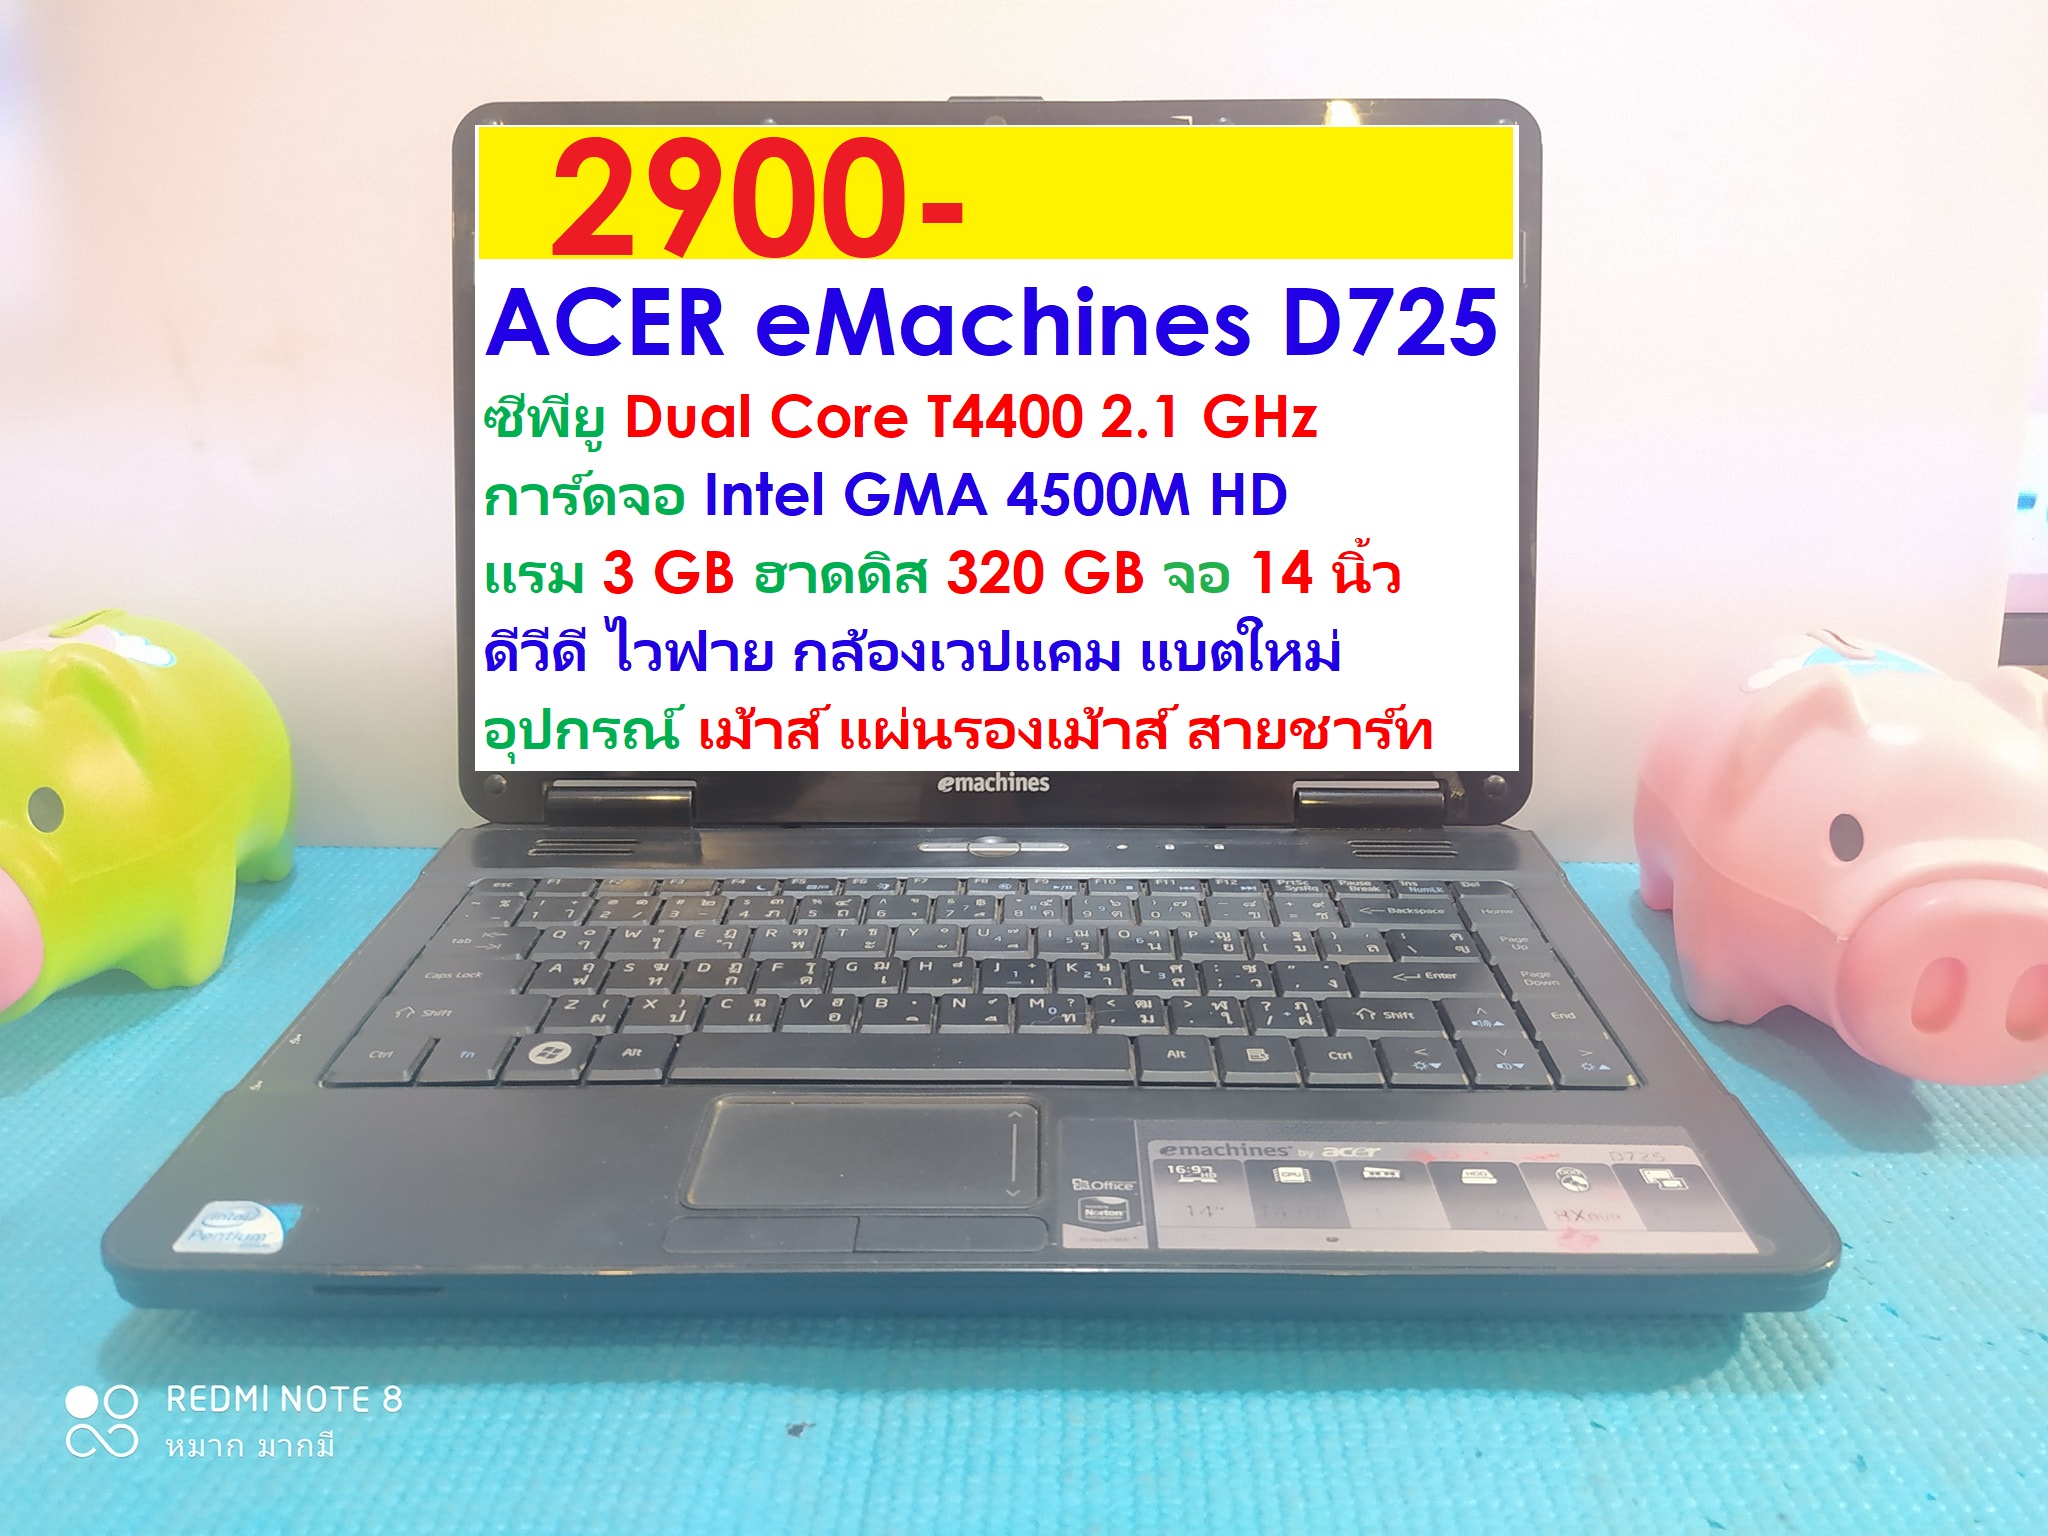 ACER eMachines D725 รูปที่ 1